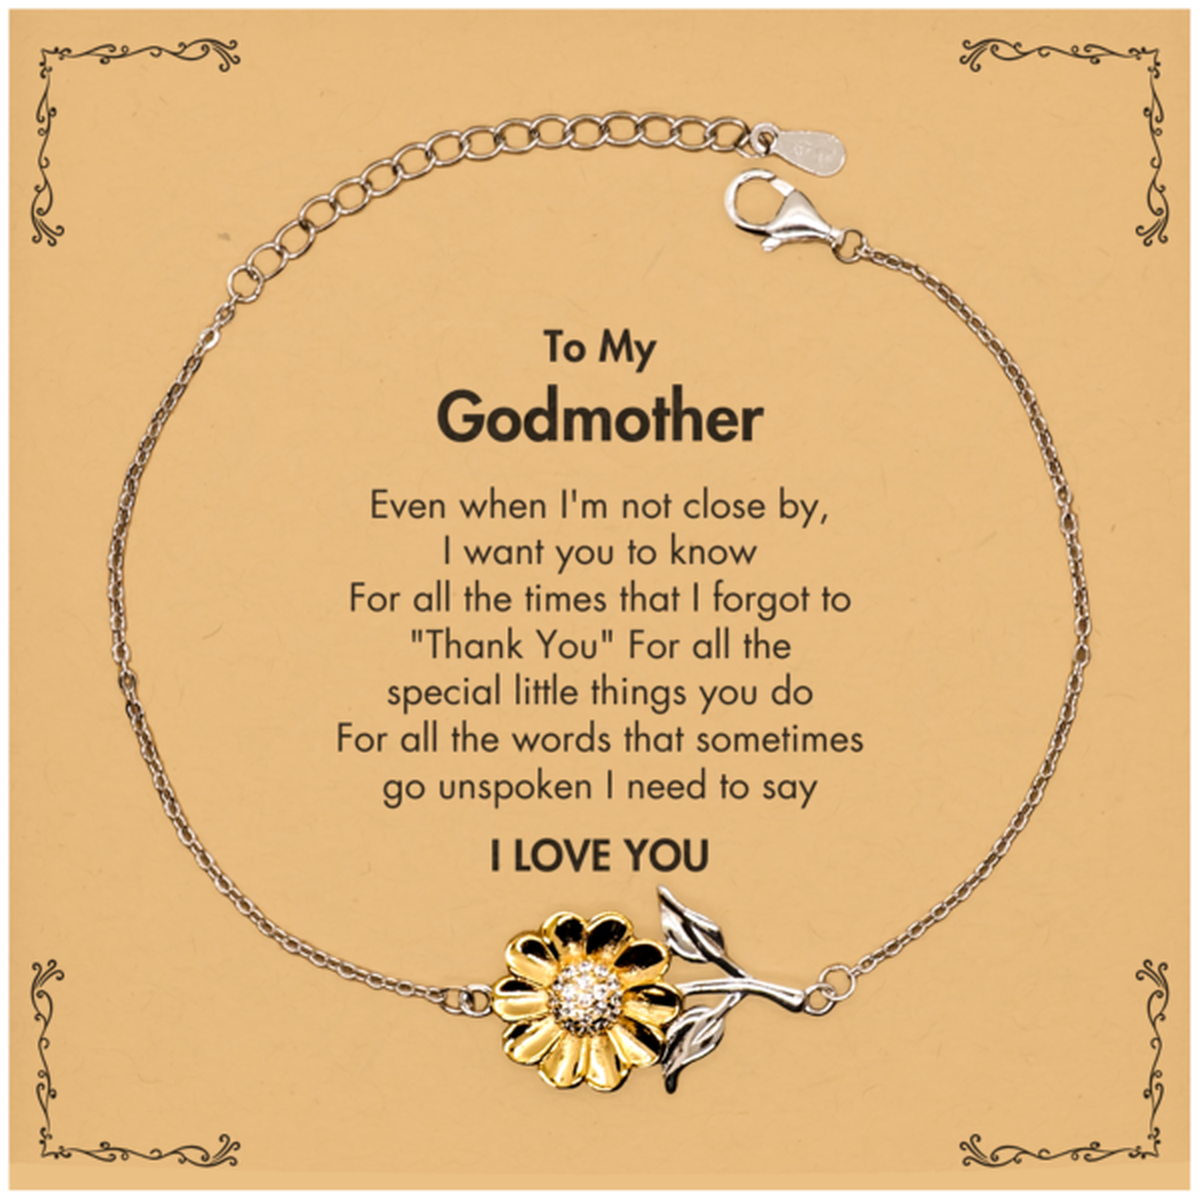 Thank You Gifts for Godmother, Keepsake Sunflower Bracelet Gifts for Godmother Birthday Mother's day Father's Day Godmother For all the words That sometimes go unspoken I need to say I LOVE YOU